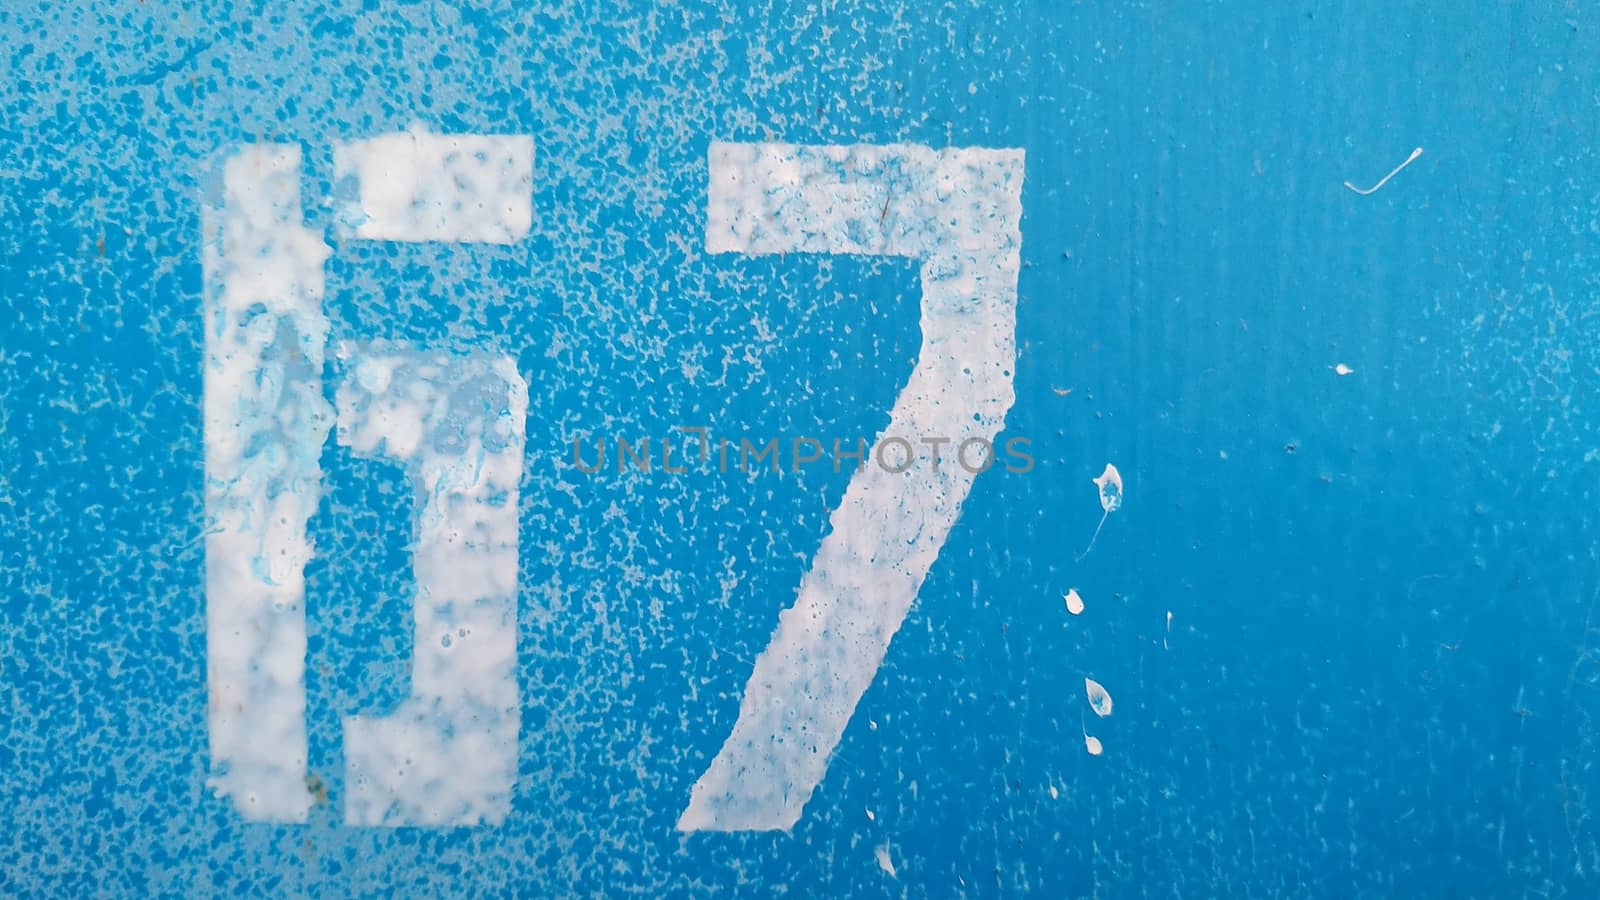 The number 67 with white paint on a cracked blue background.